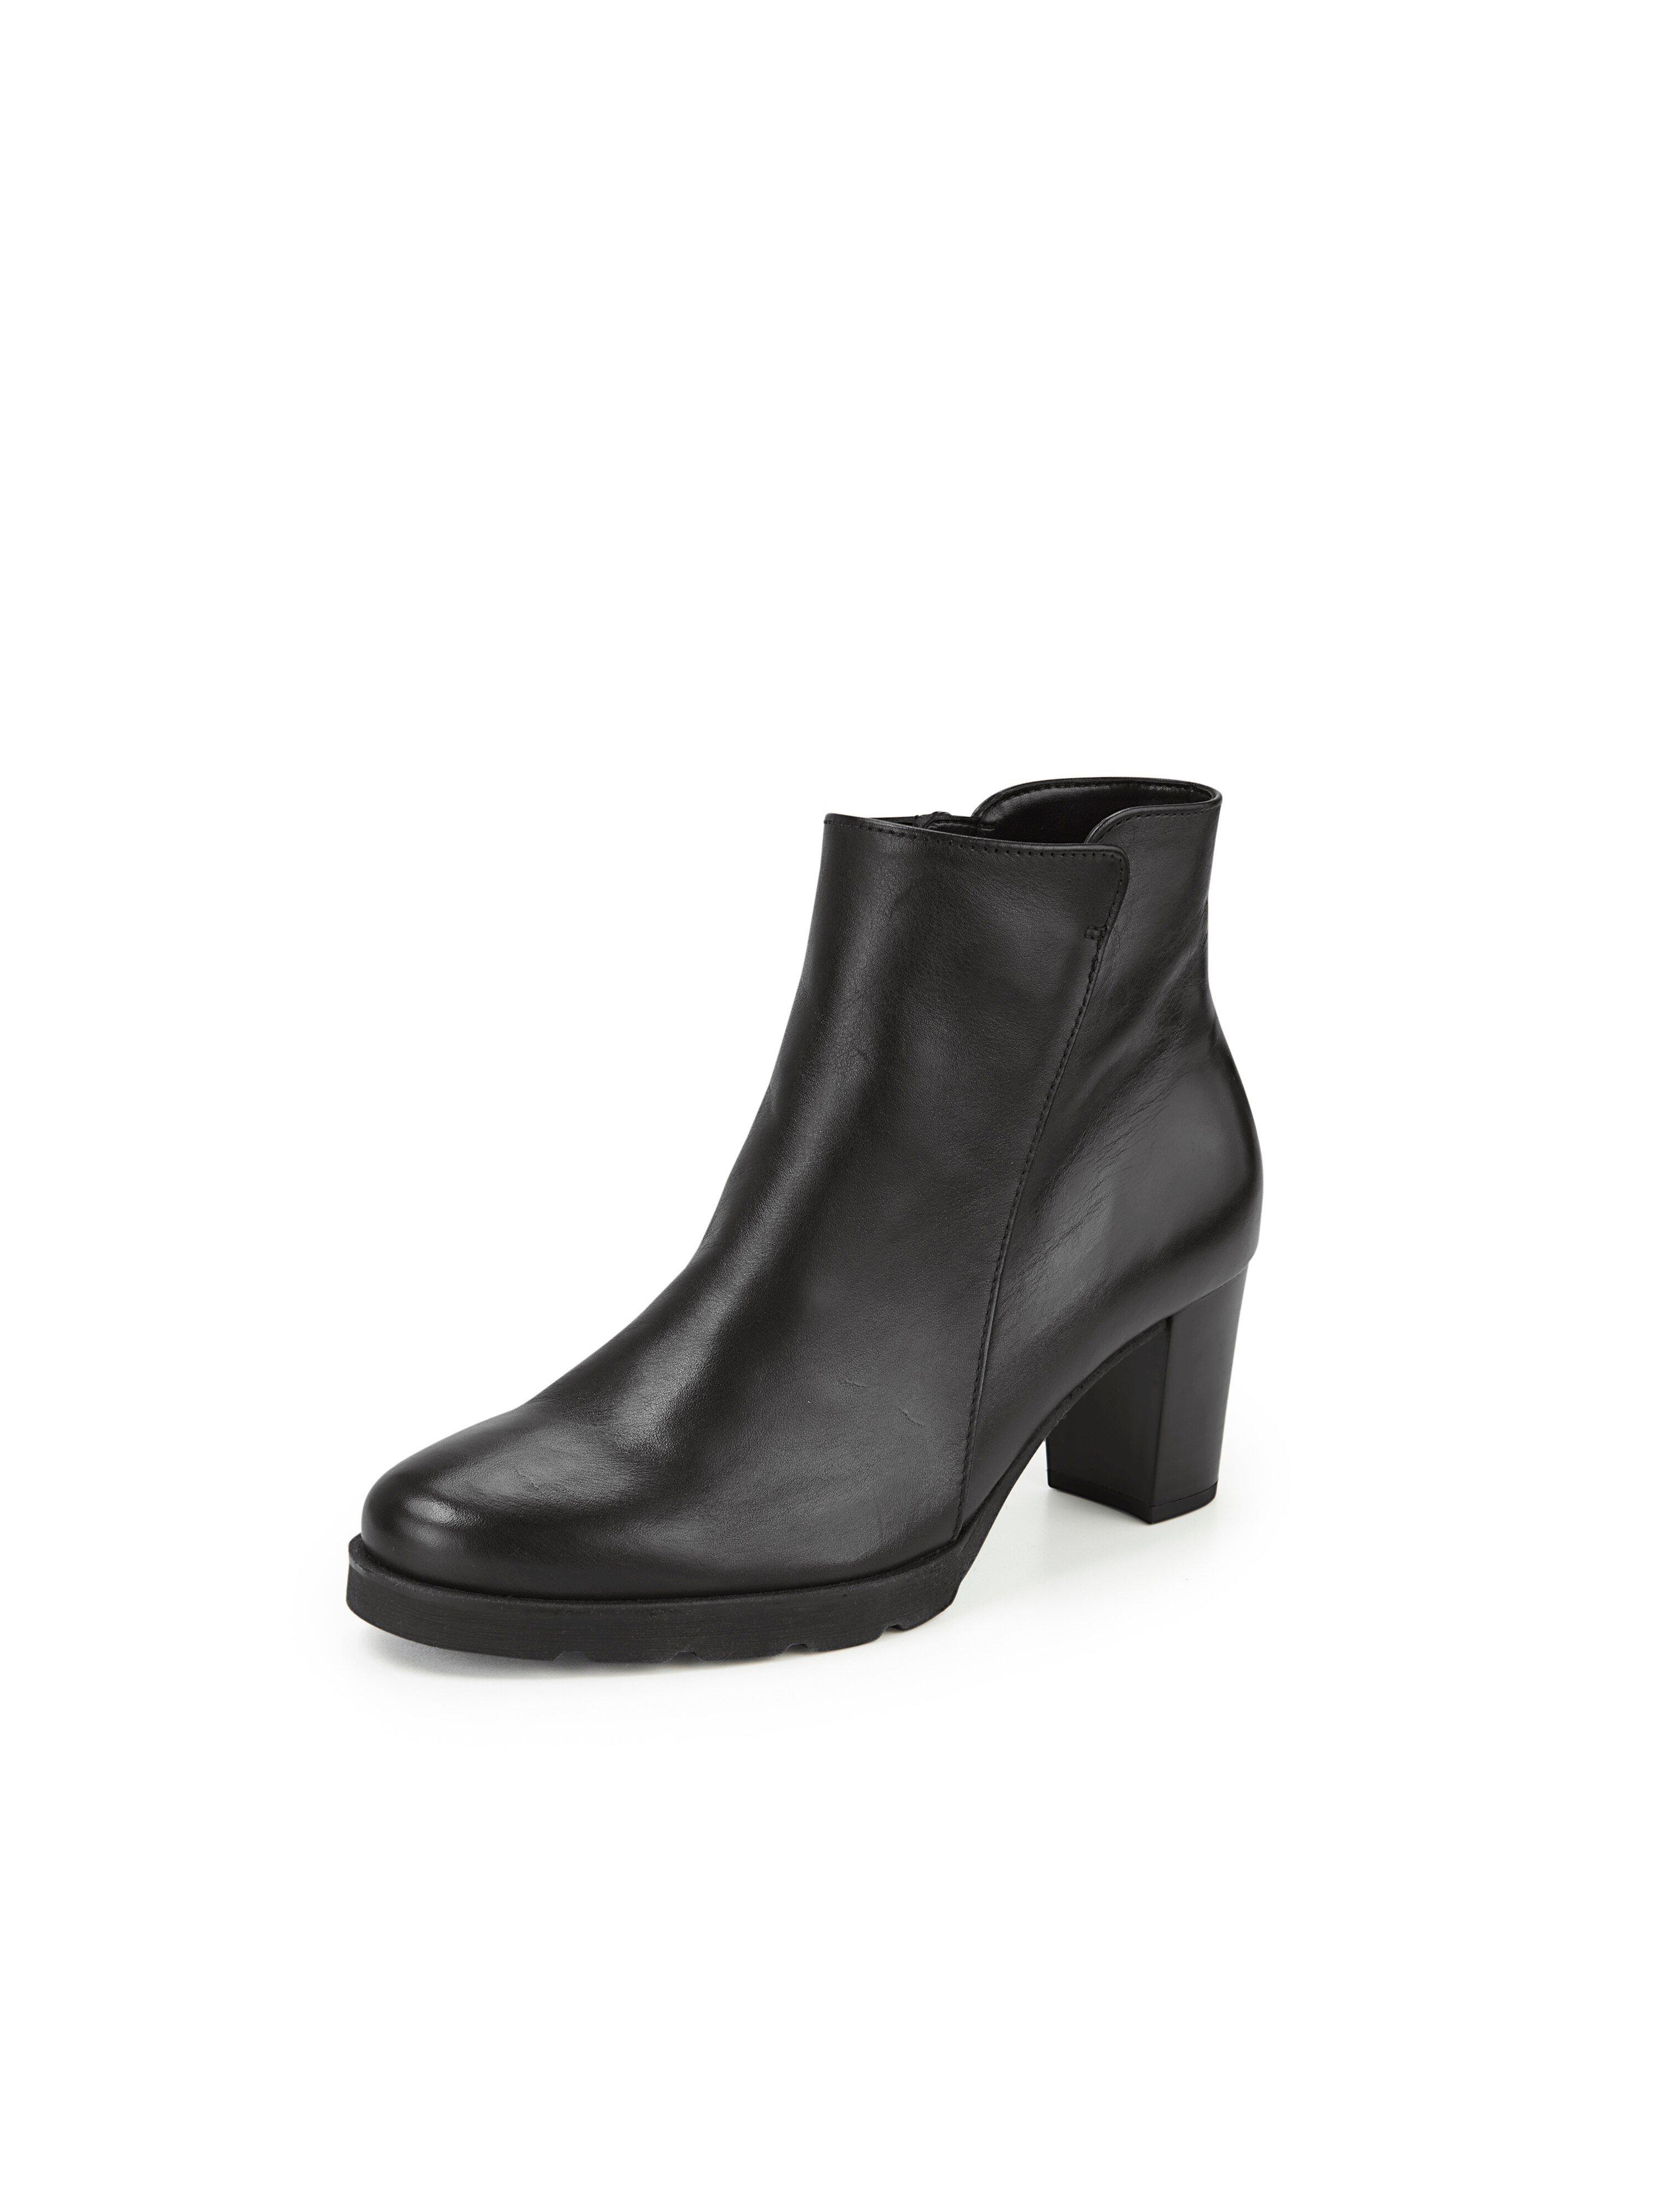 gabor black ankle boots